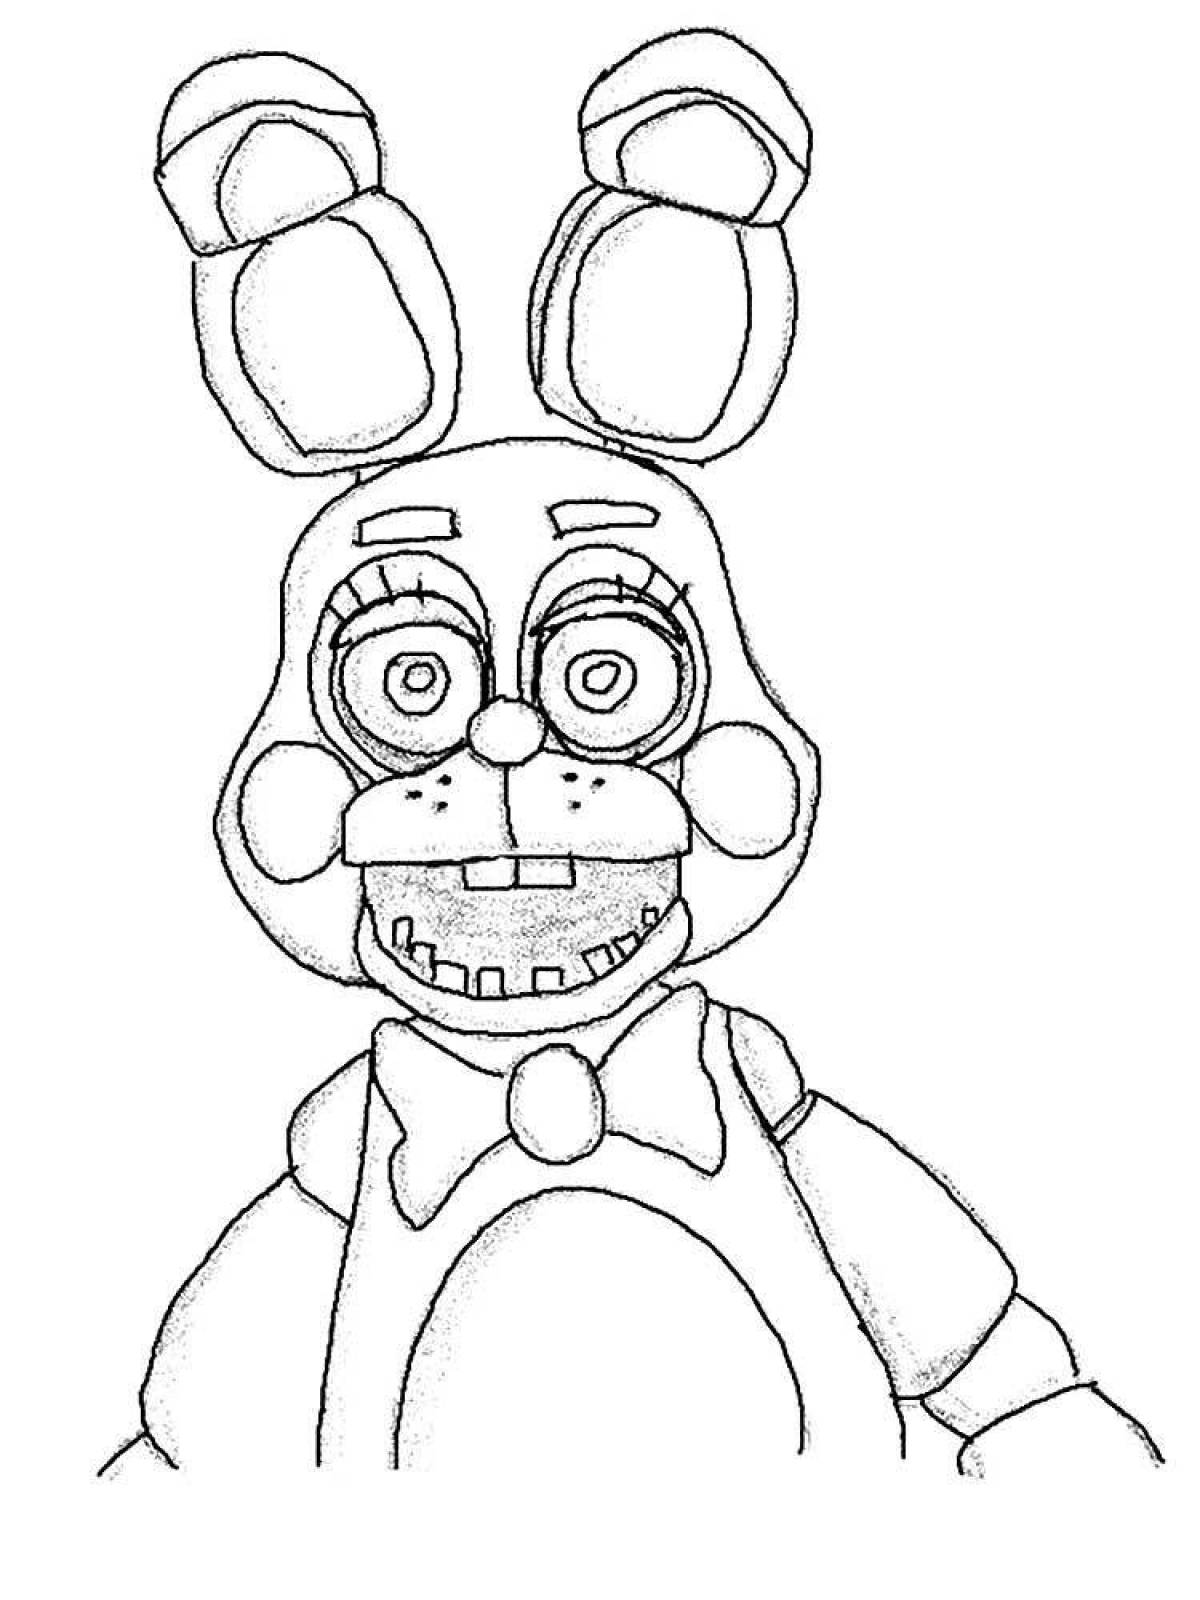 Lively bonnie coloring page